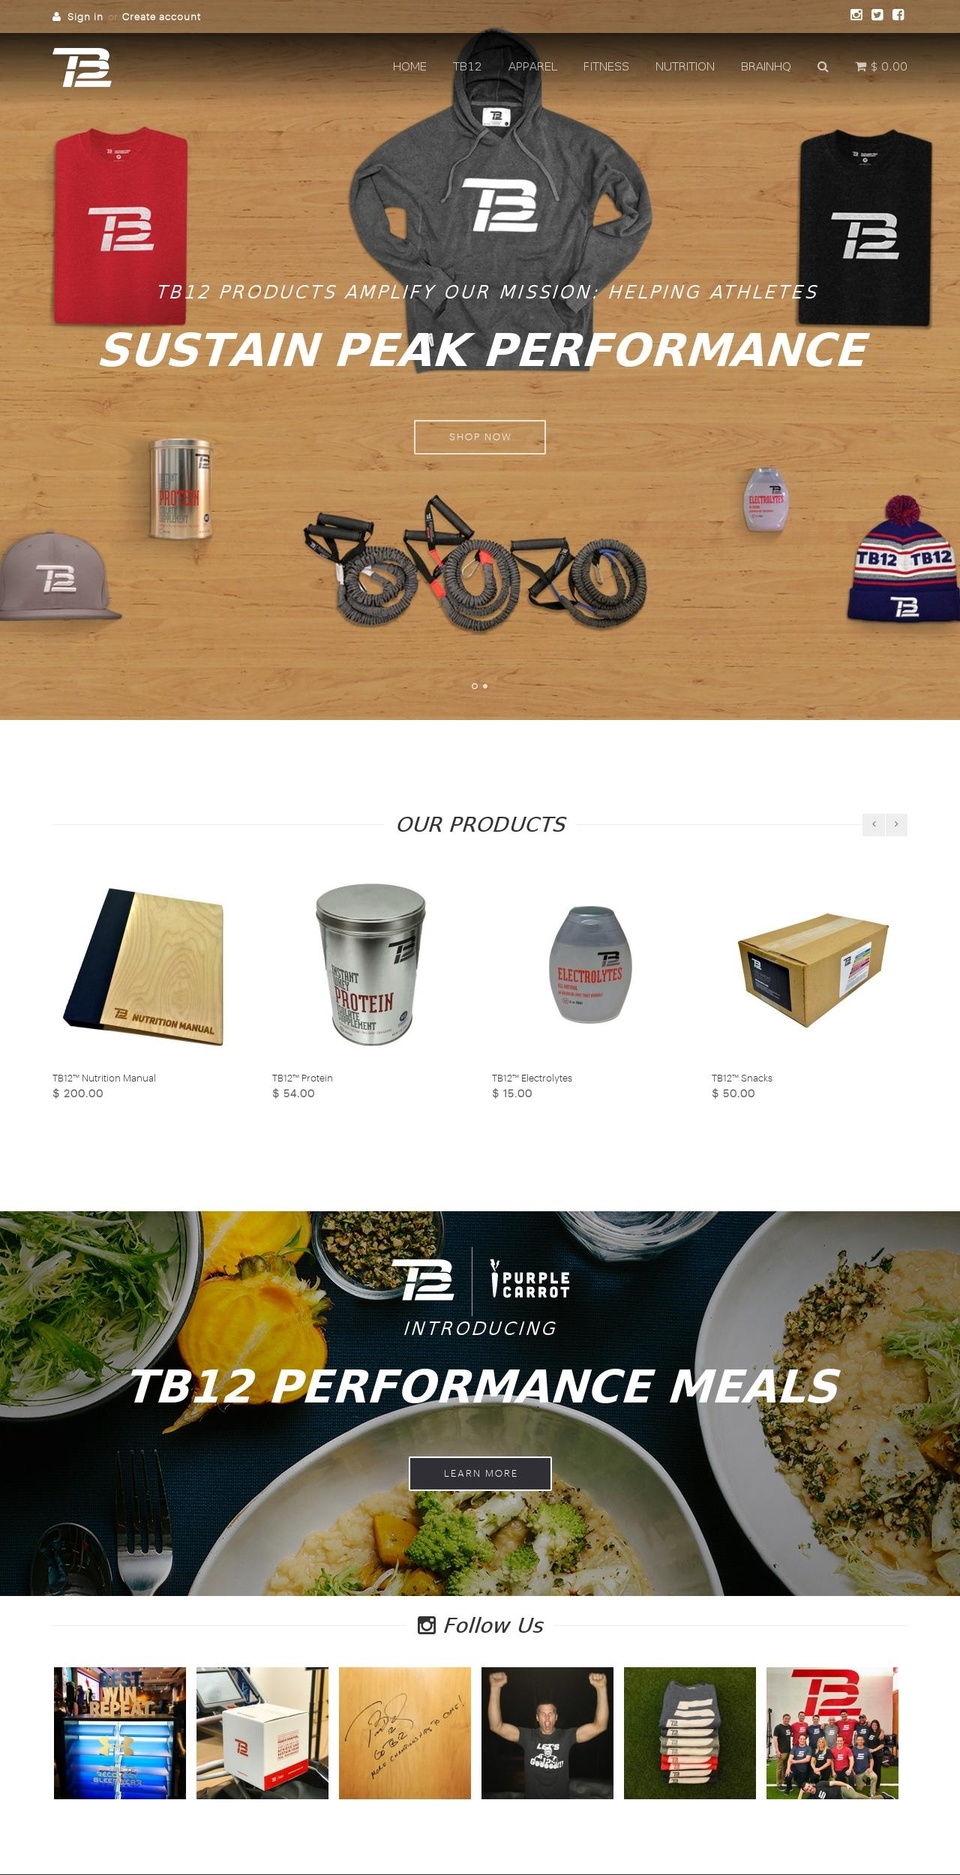 Focal Shopify theme site example tb12store.com